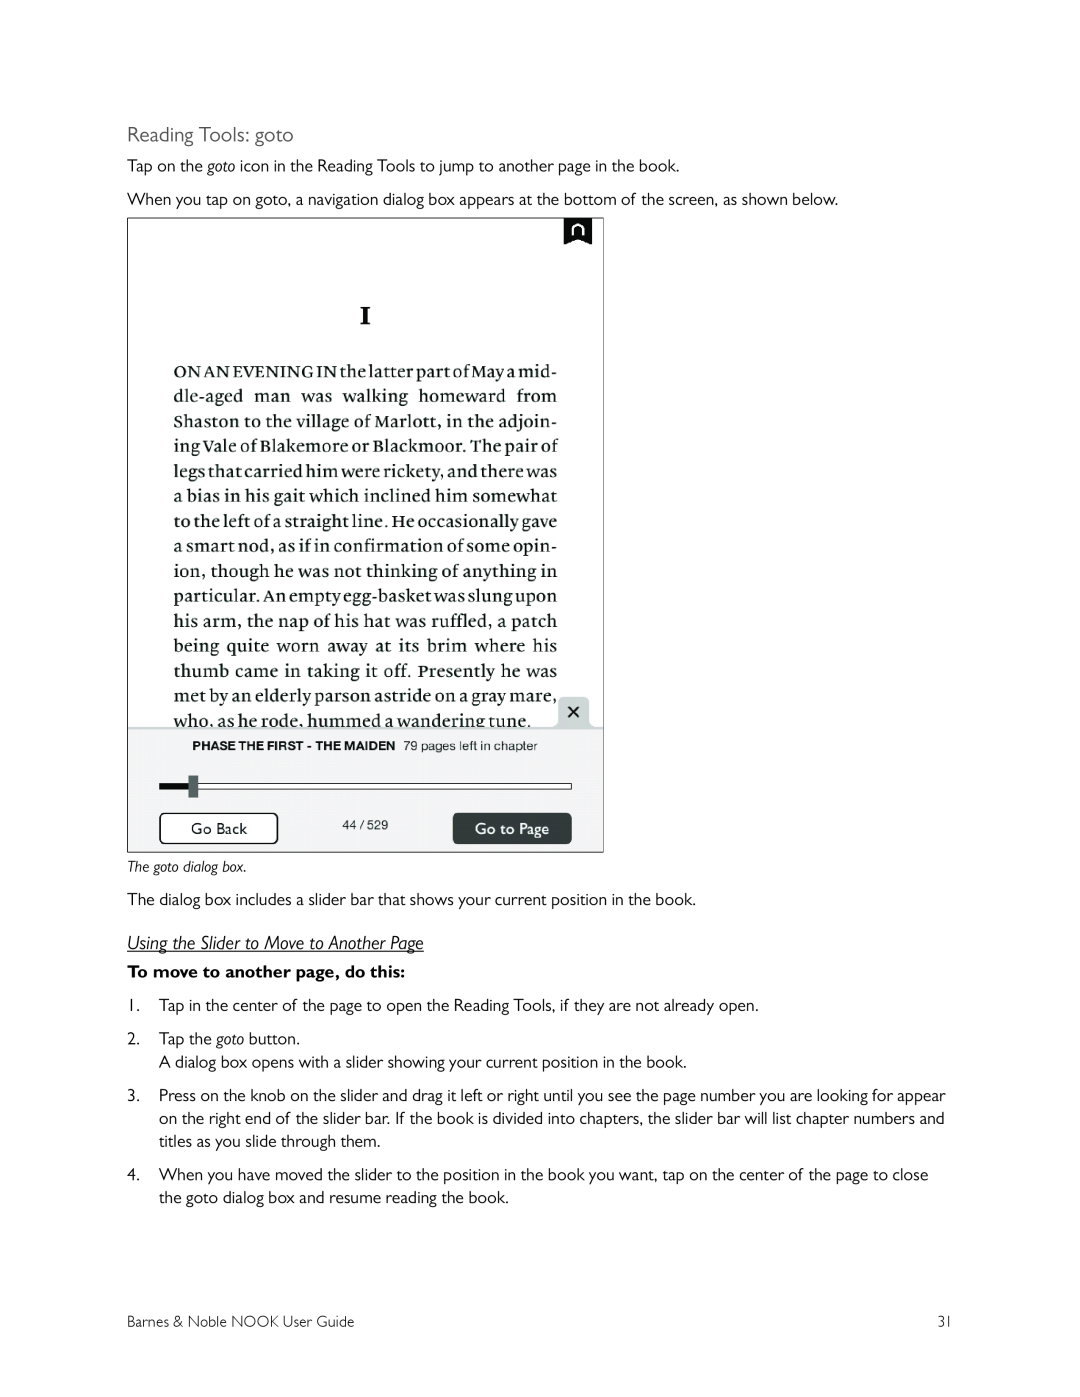 Barnes & Noble BNRV300 Reading Tools goto, Using the Slider to Move to Another Page, To move to another page, do this 